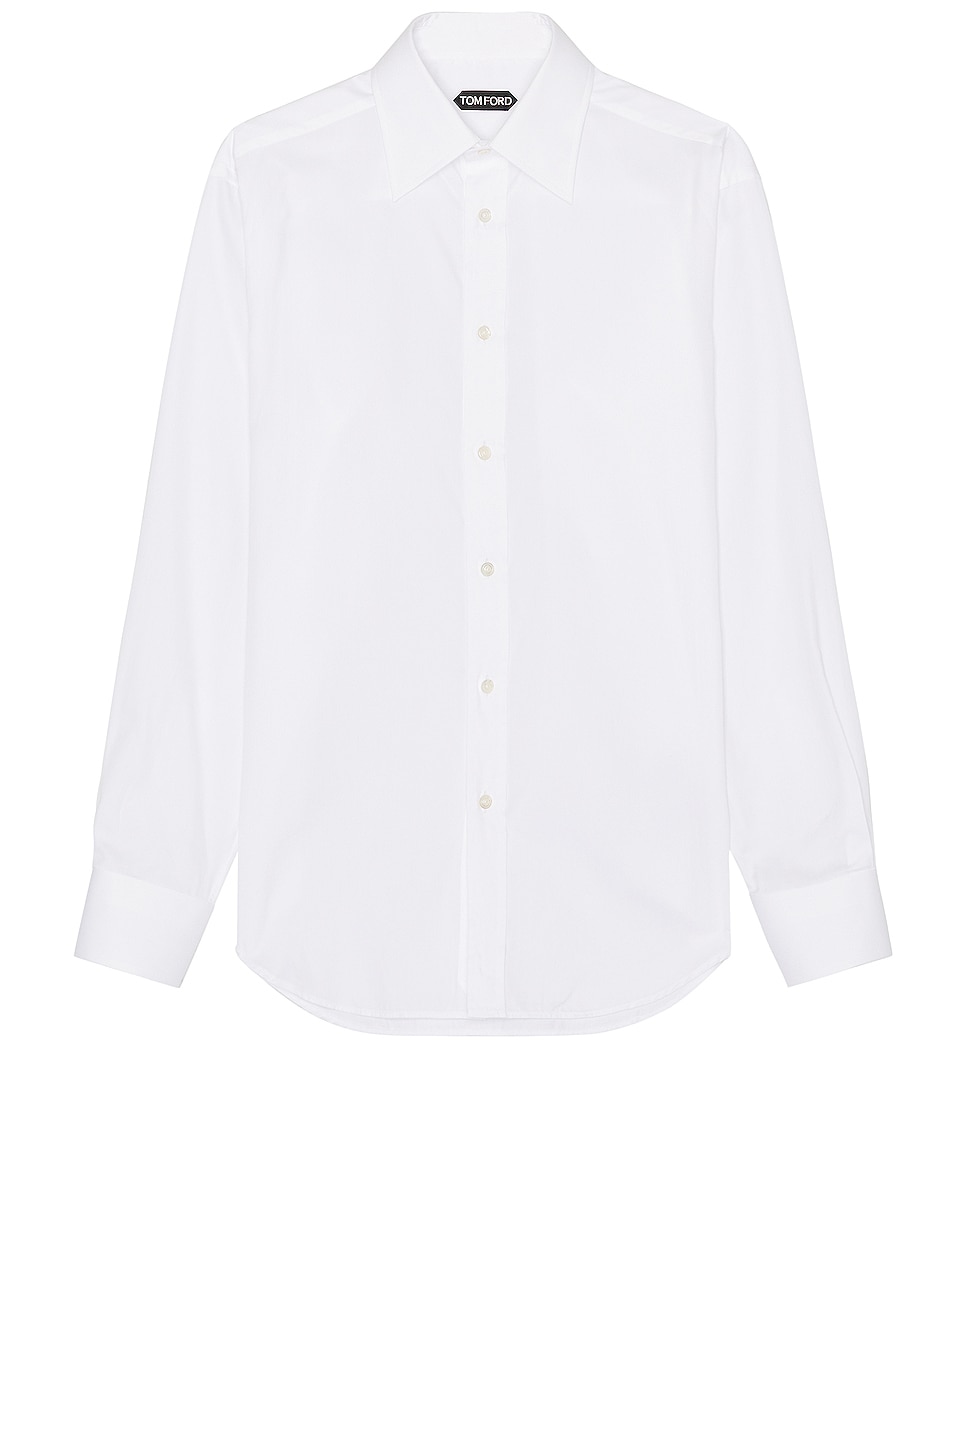 Image 1 of TOM FORD Cotton Silk Serge Fluid Fit Shirt in Optical White